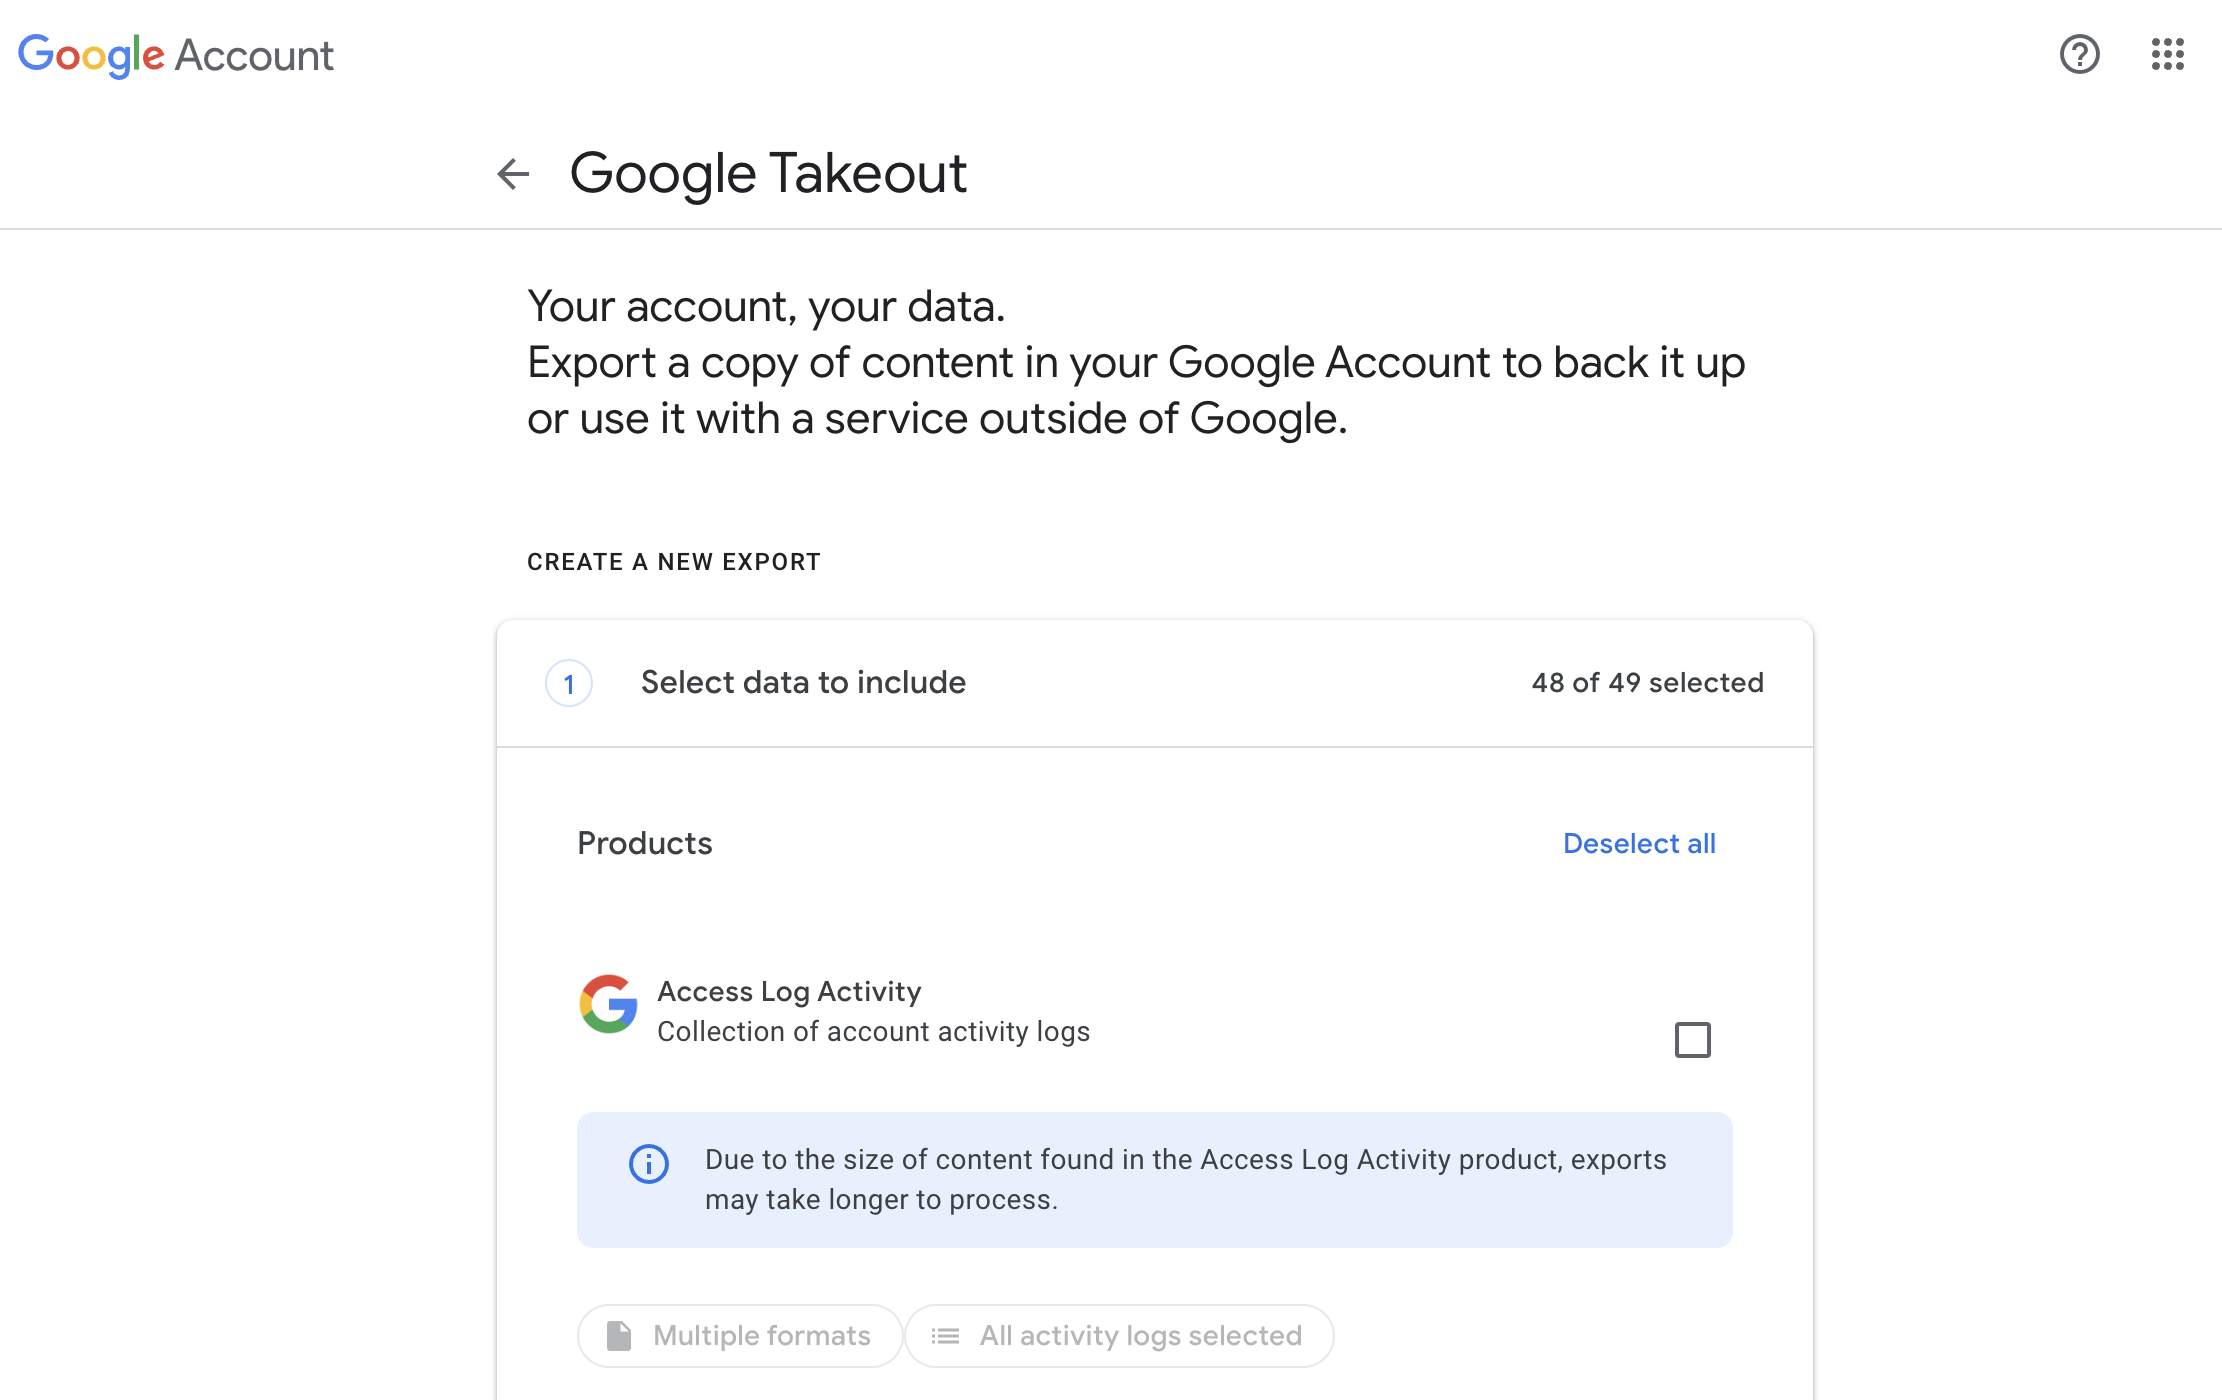 How to Remove Gmail from your Phone (Screenshots Included)